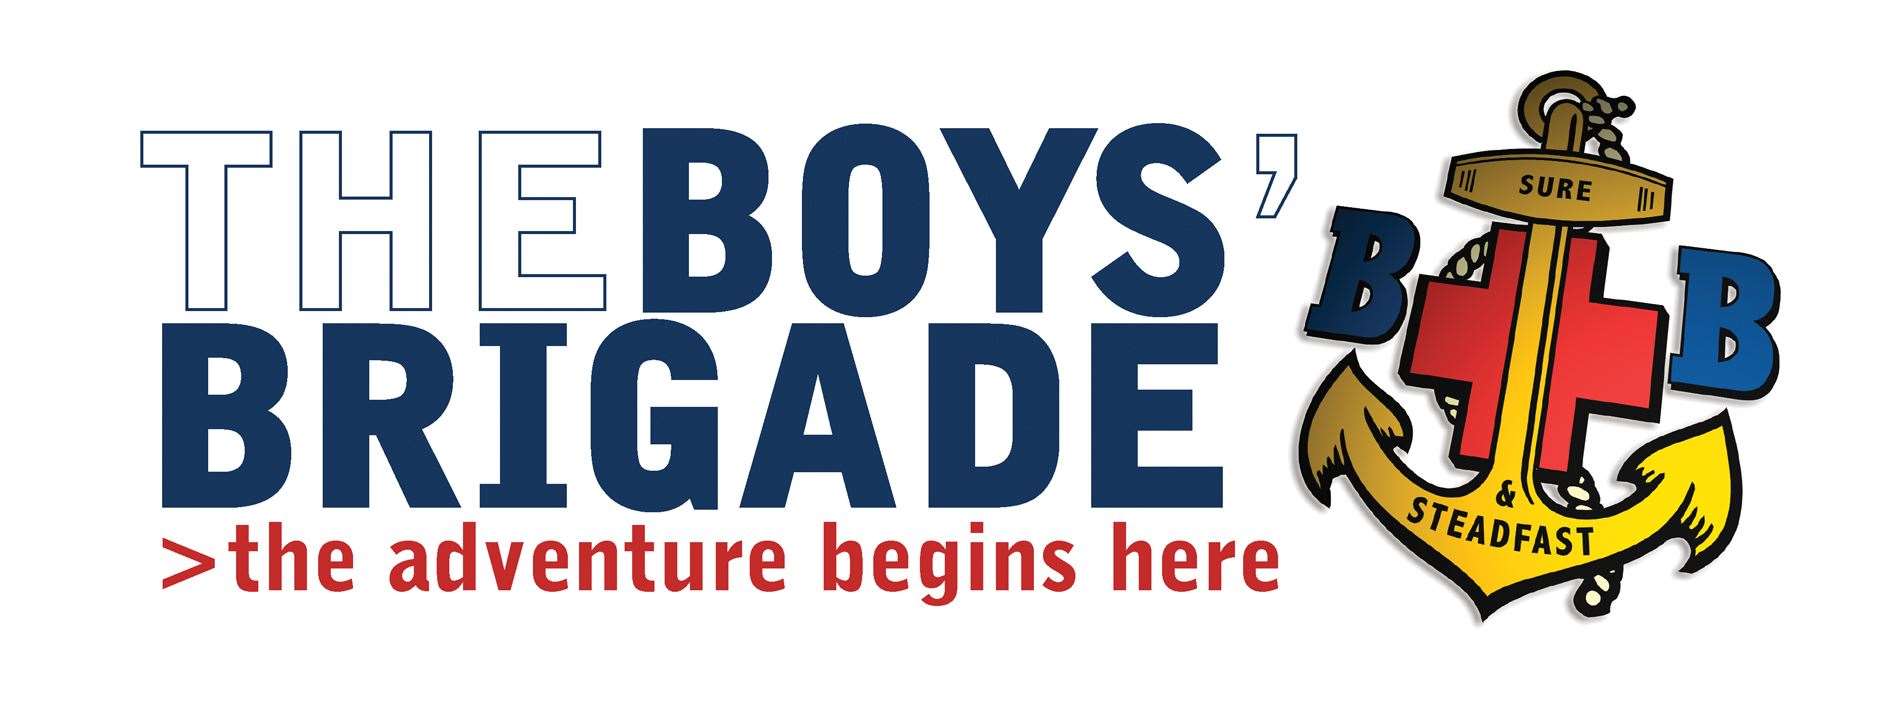 2nd Forres Boys' Brigade is hoping for support from the community during their fundraiser.